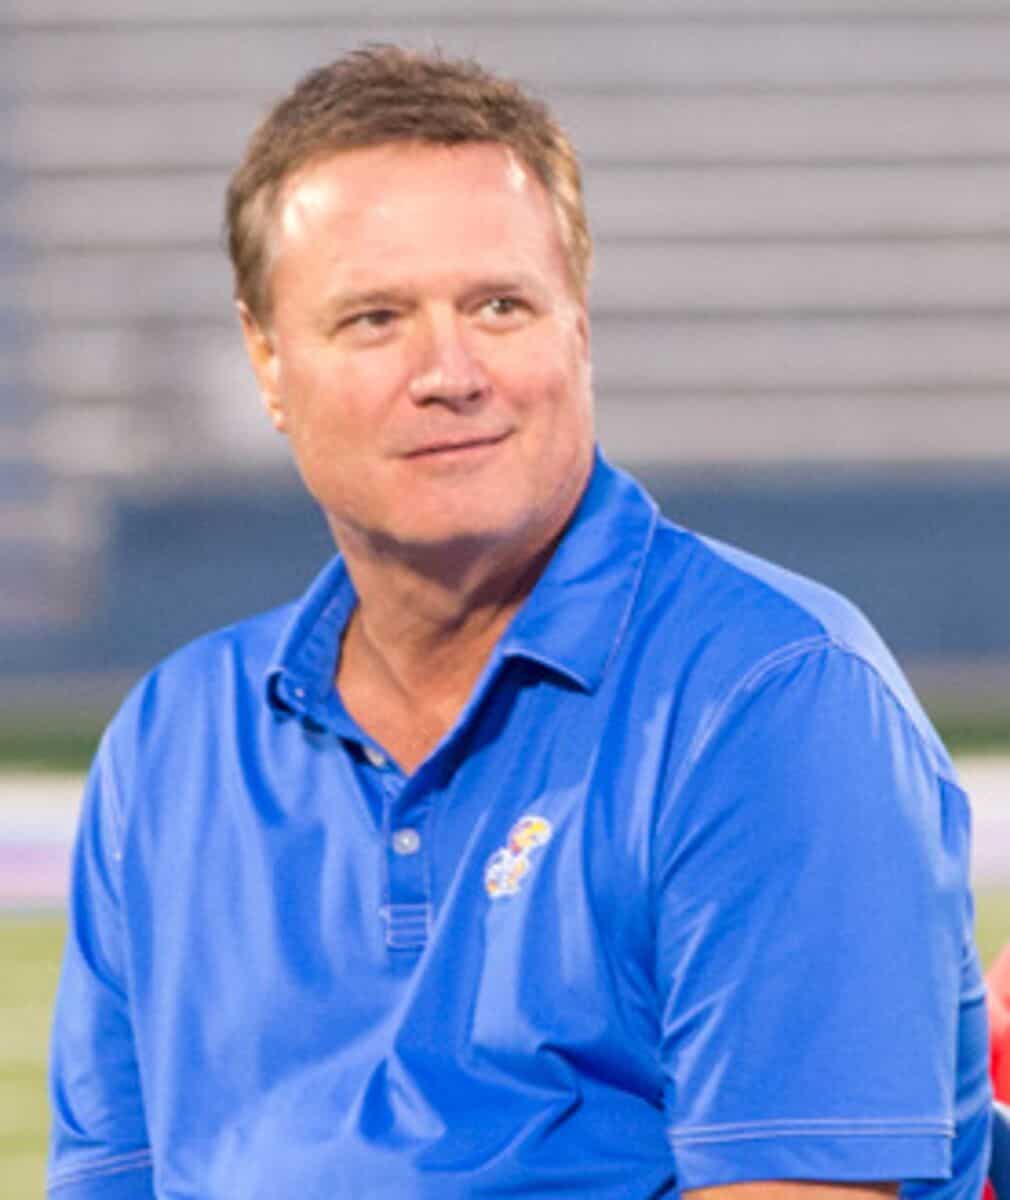 Bill Self net worth in Coaches category